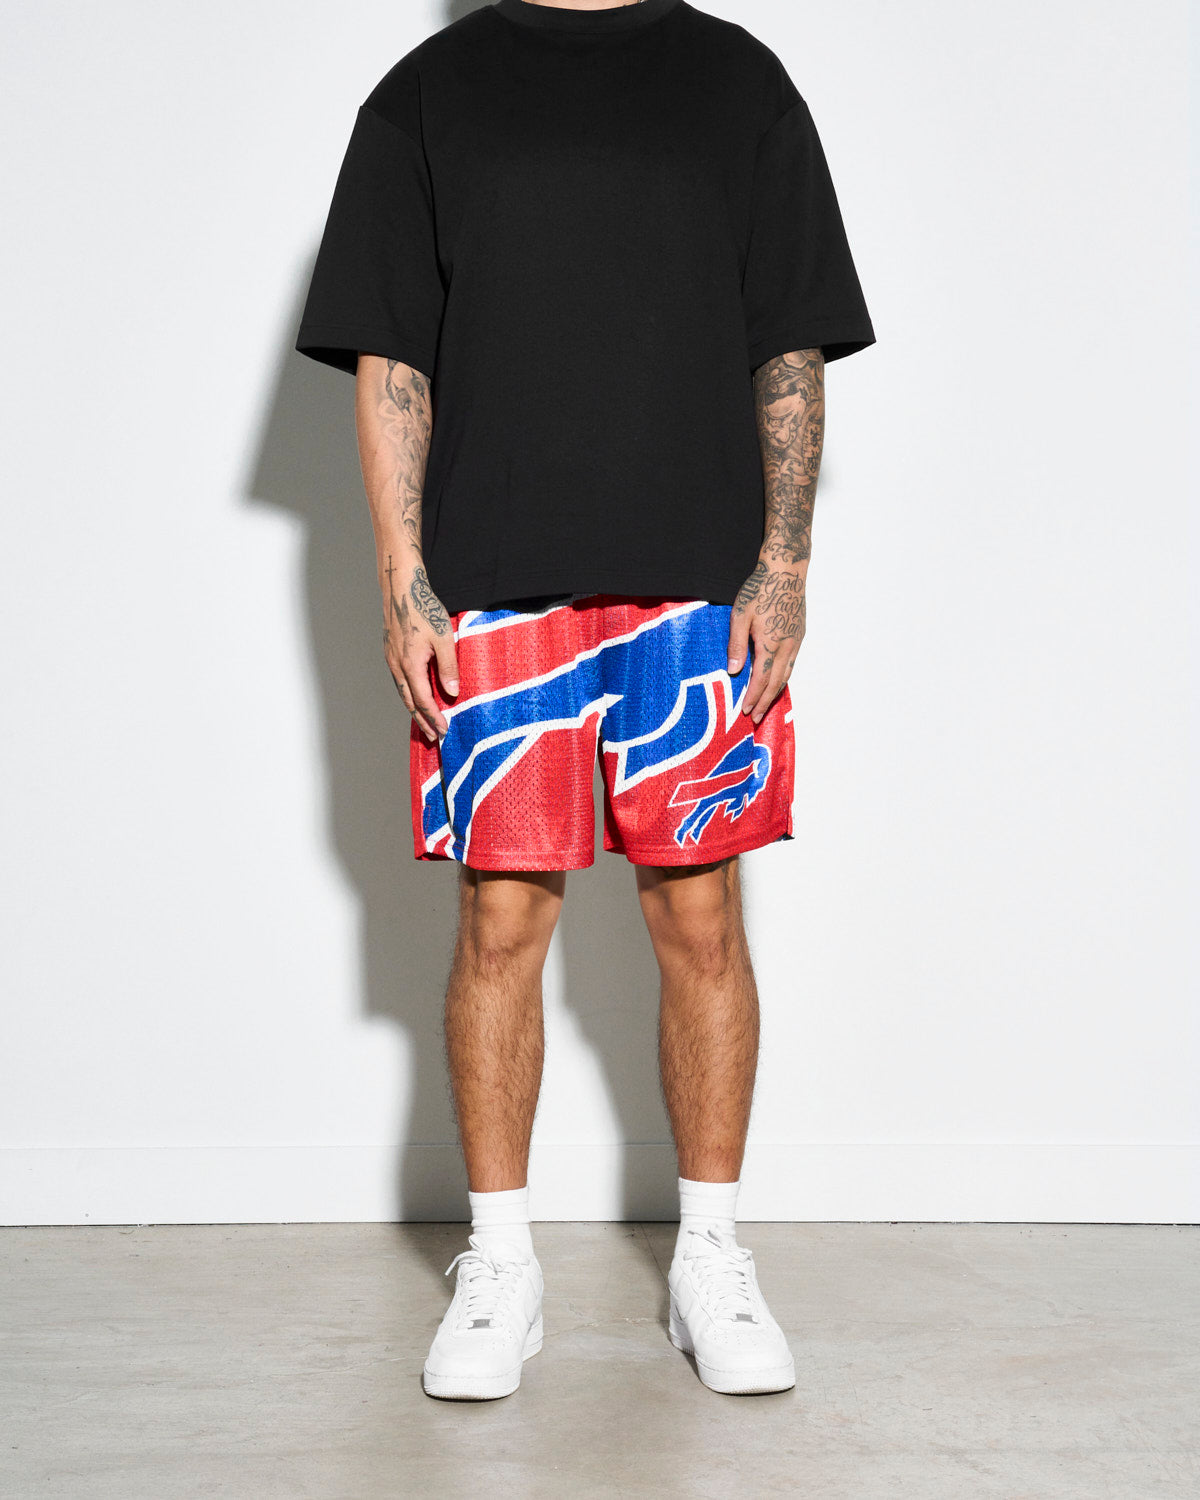 Men's mesh shorts with retro WWE, Music, and Movie themed prints